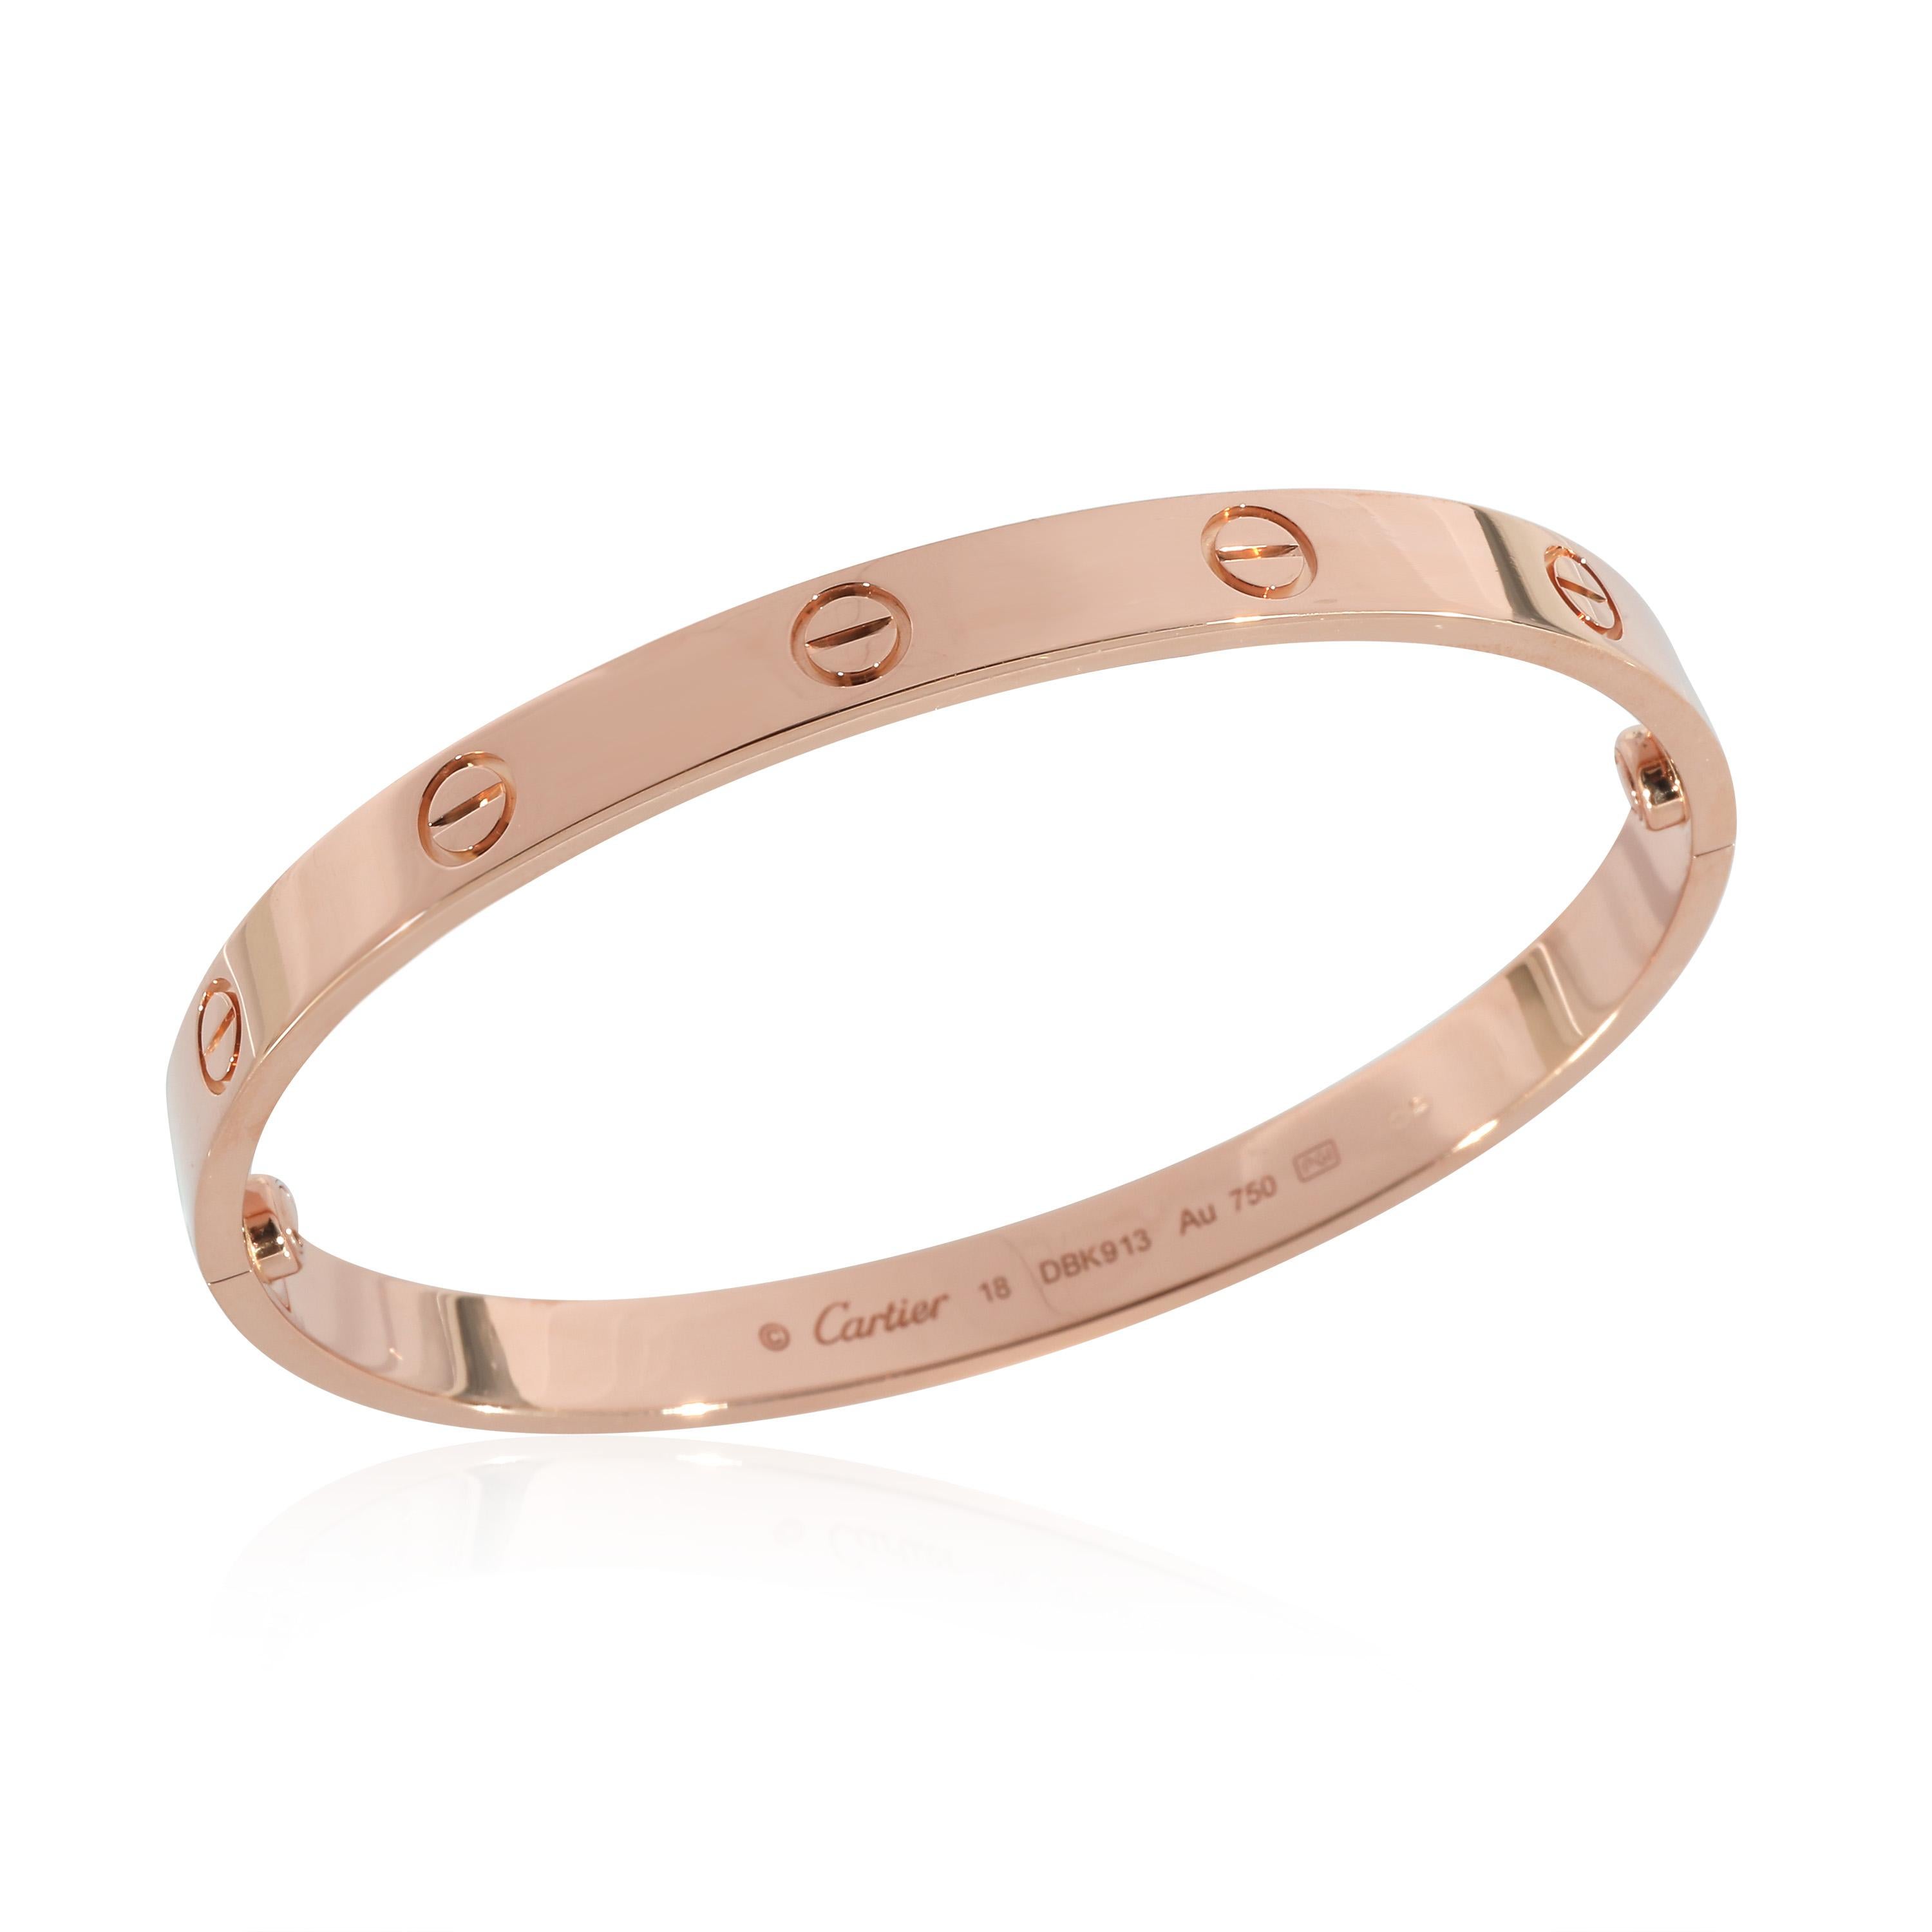 Cartier Love Bracelet in 18k Rose Gold In Excellent Condition For Sale In New York, NY